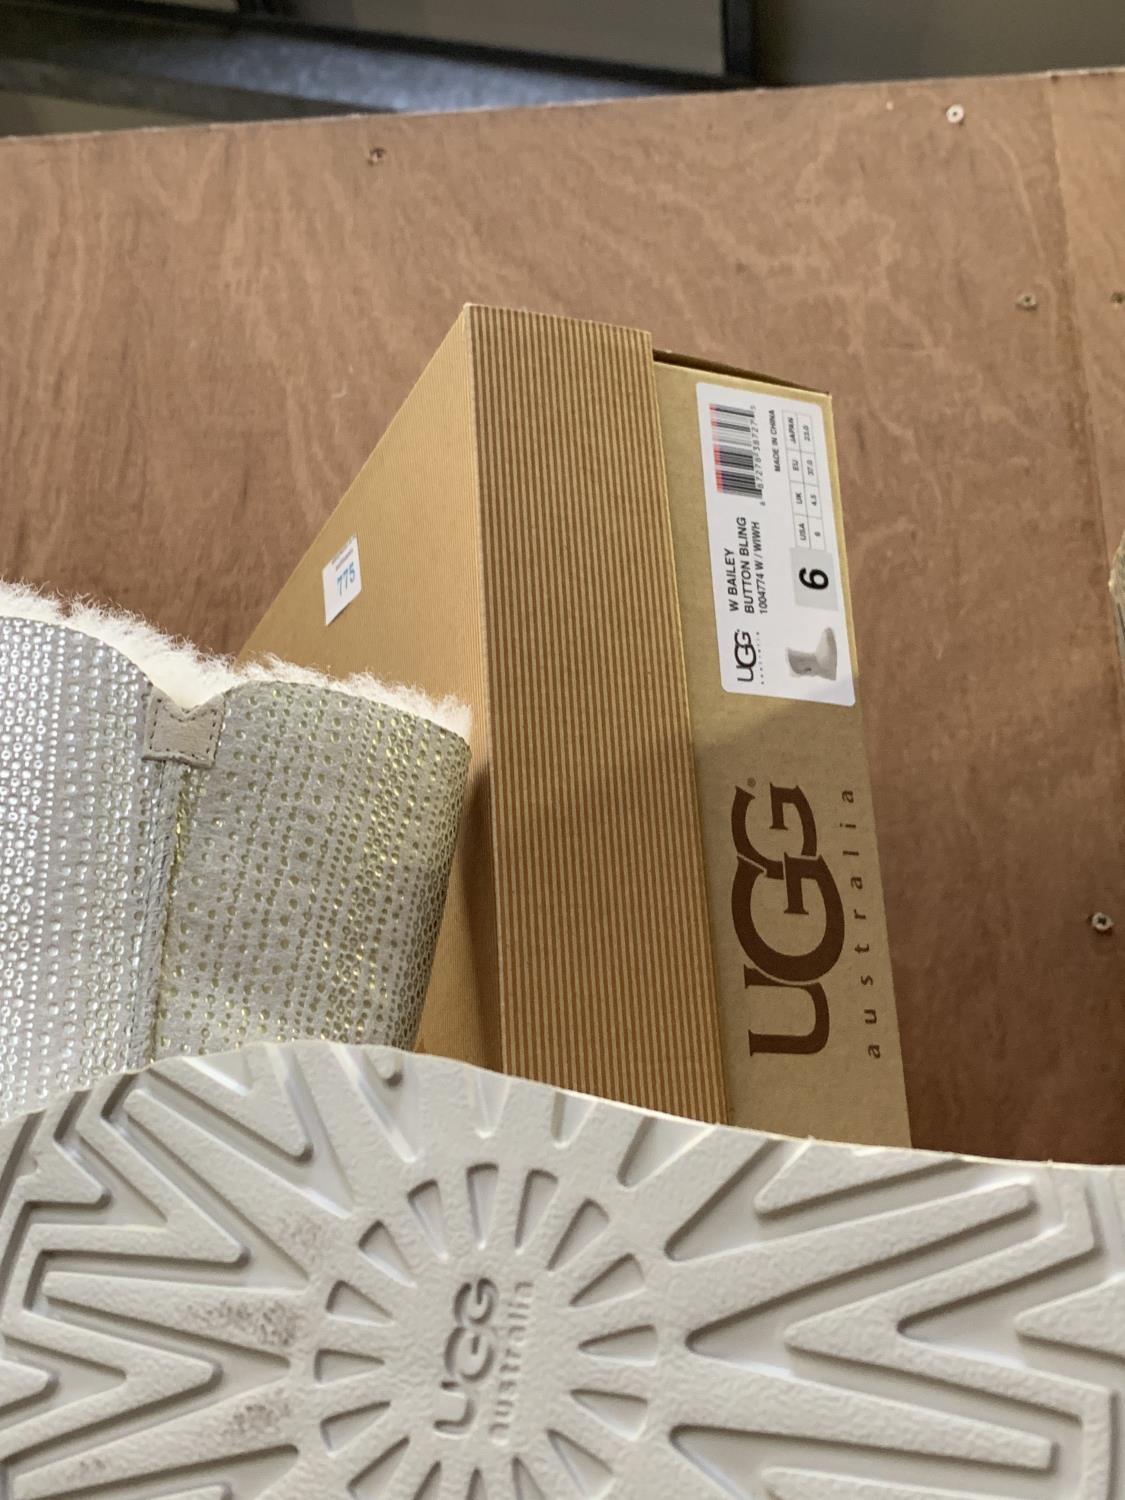 A PAIR OF GREY SIZE 6 UGG BOOTS WITH BOX - Image 2 of 2